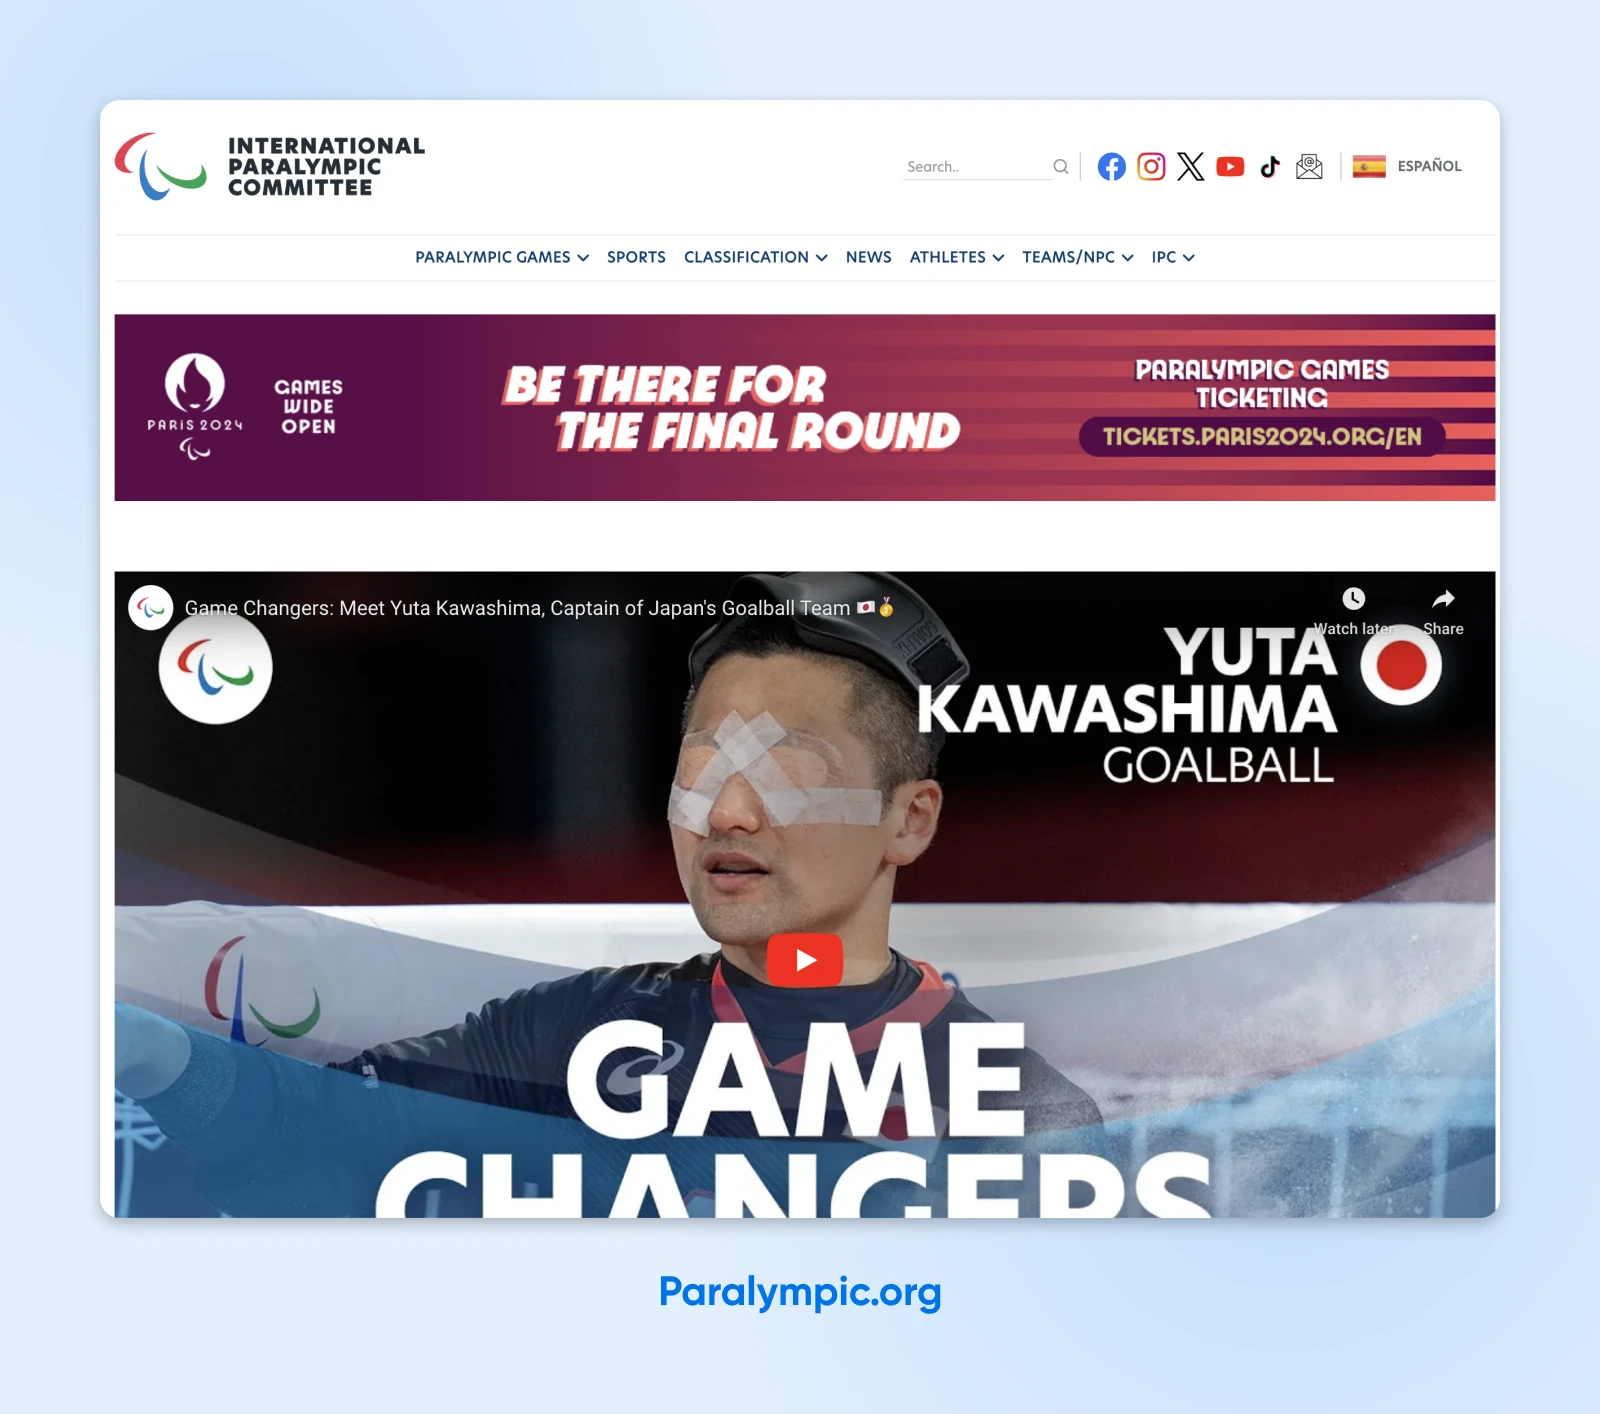 IPC's homepage with a video featured in the hero section, header, and social buttons in the top-right corner. 